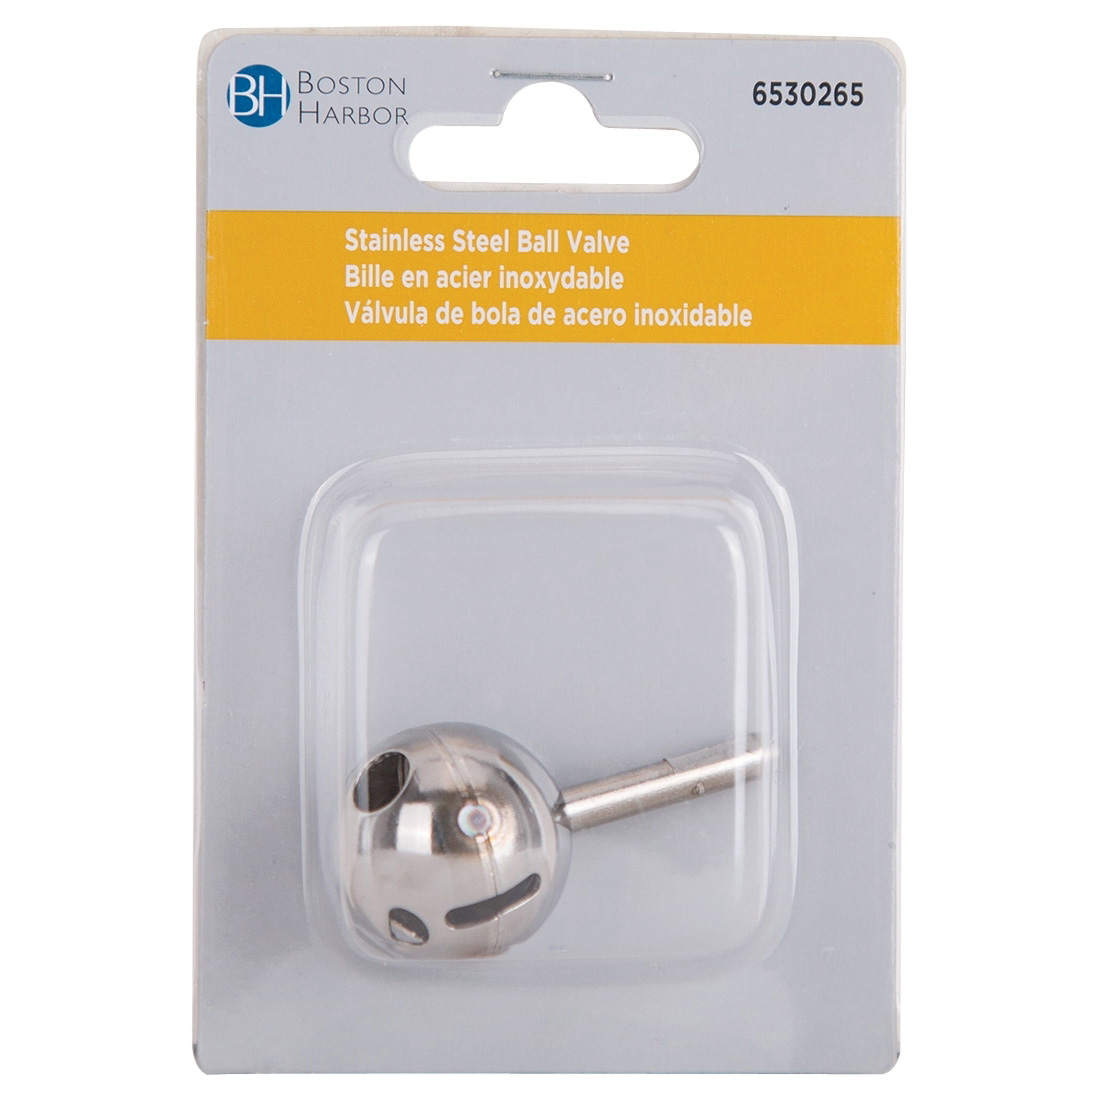 Boston Harbor A0008 Faucet Ball Assembly, Stainless Steel, For: 4111, 4111P, 8111 and 8111S Model Sink Faucets - 2